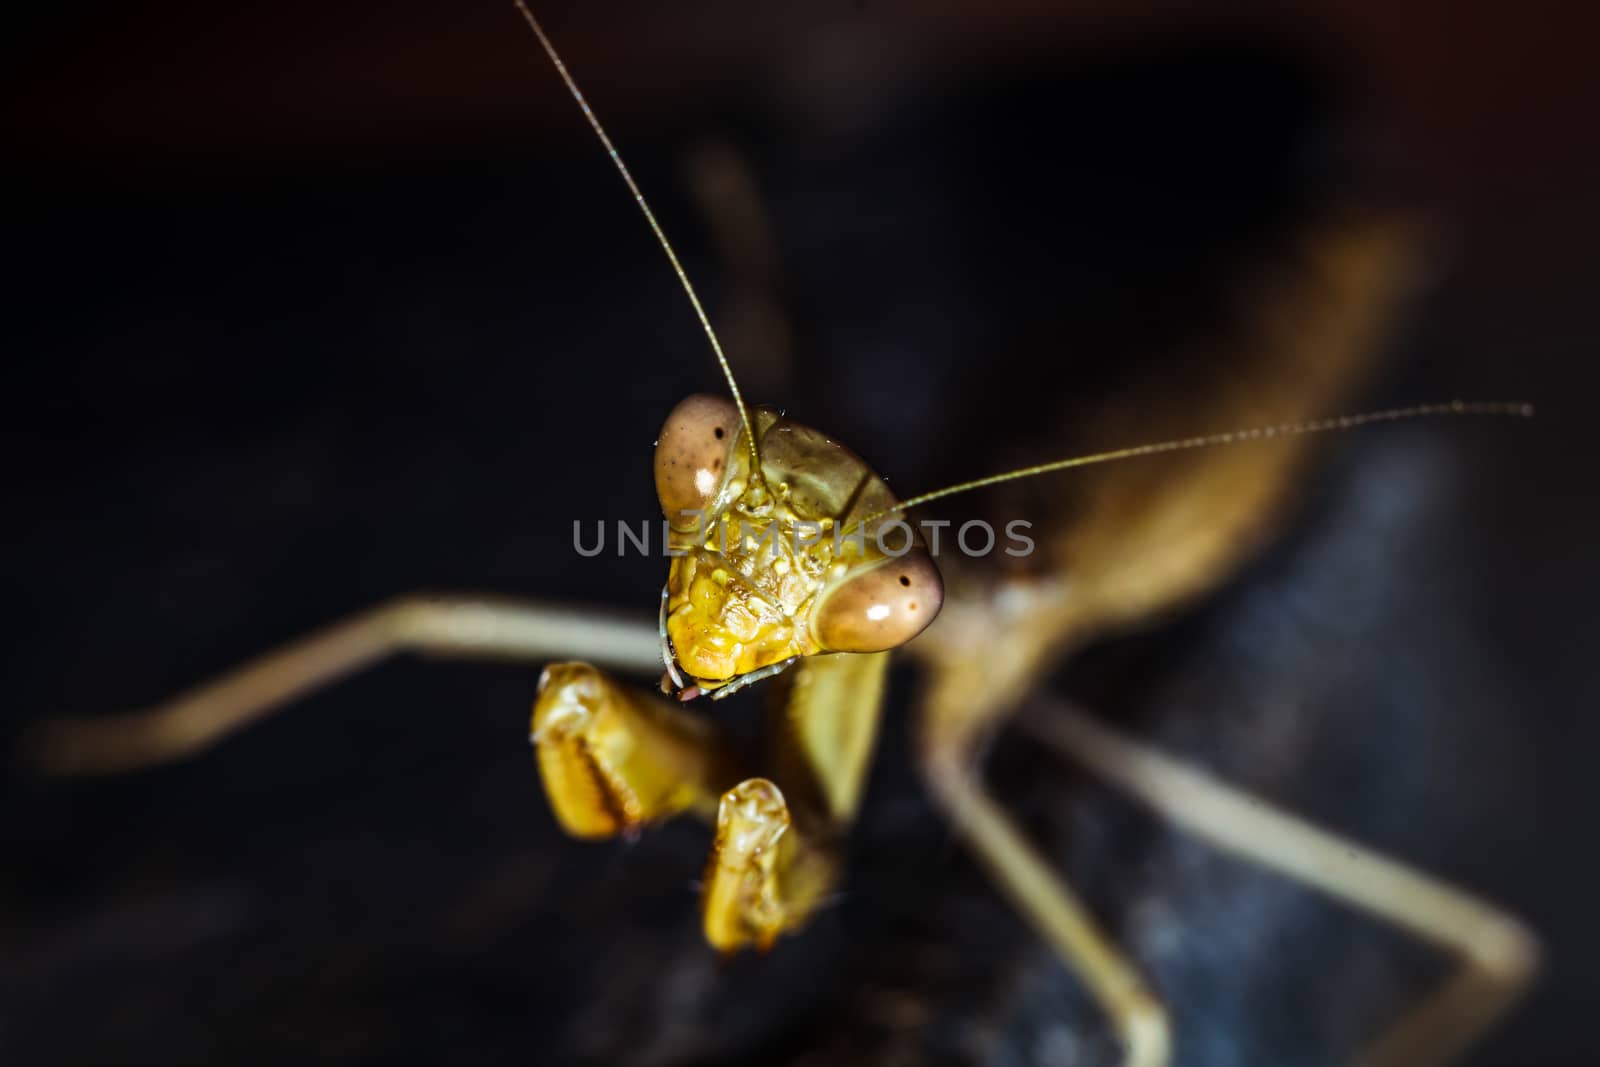 Praying mantis close-up looks into the eyes on a black background, wild nature